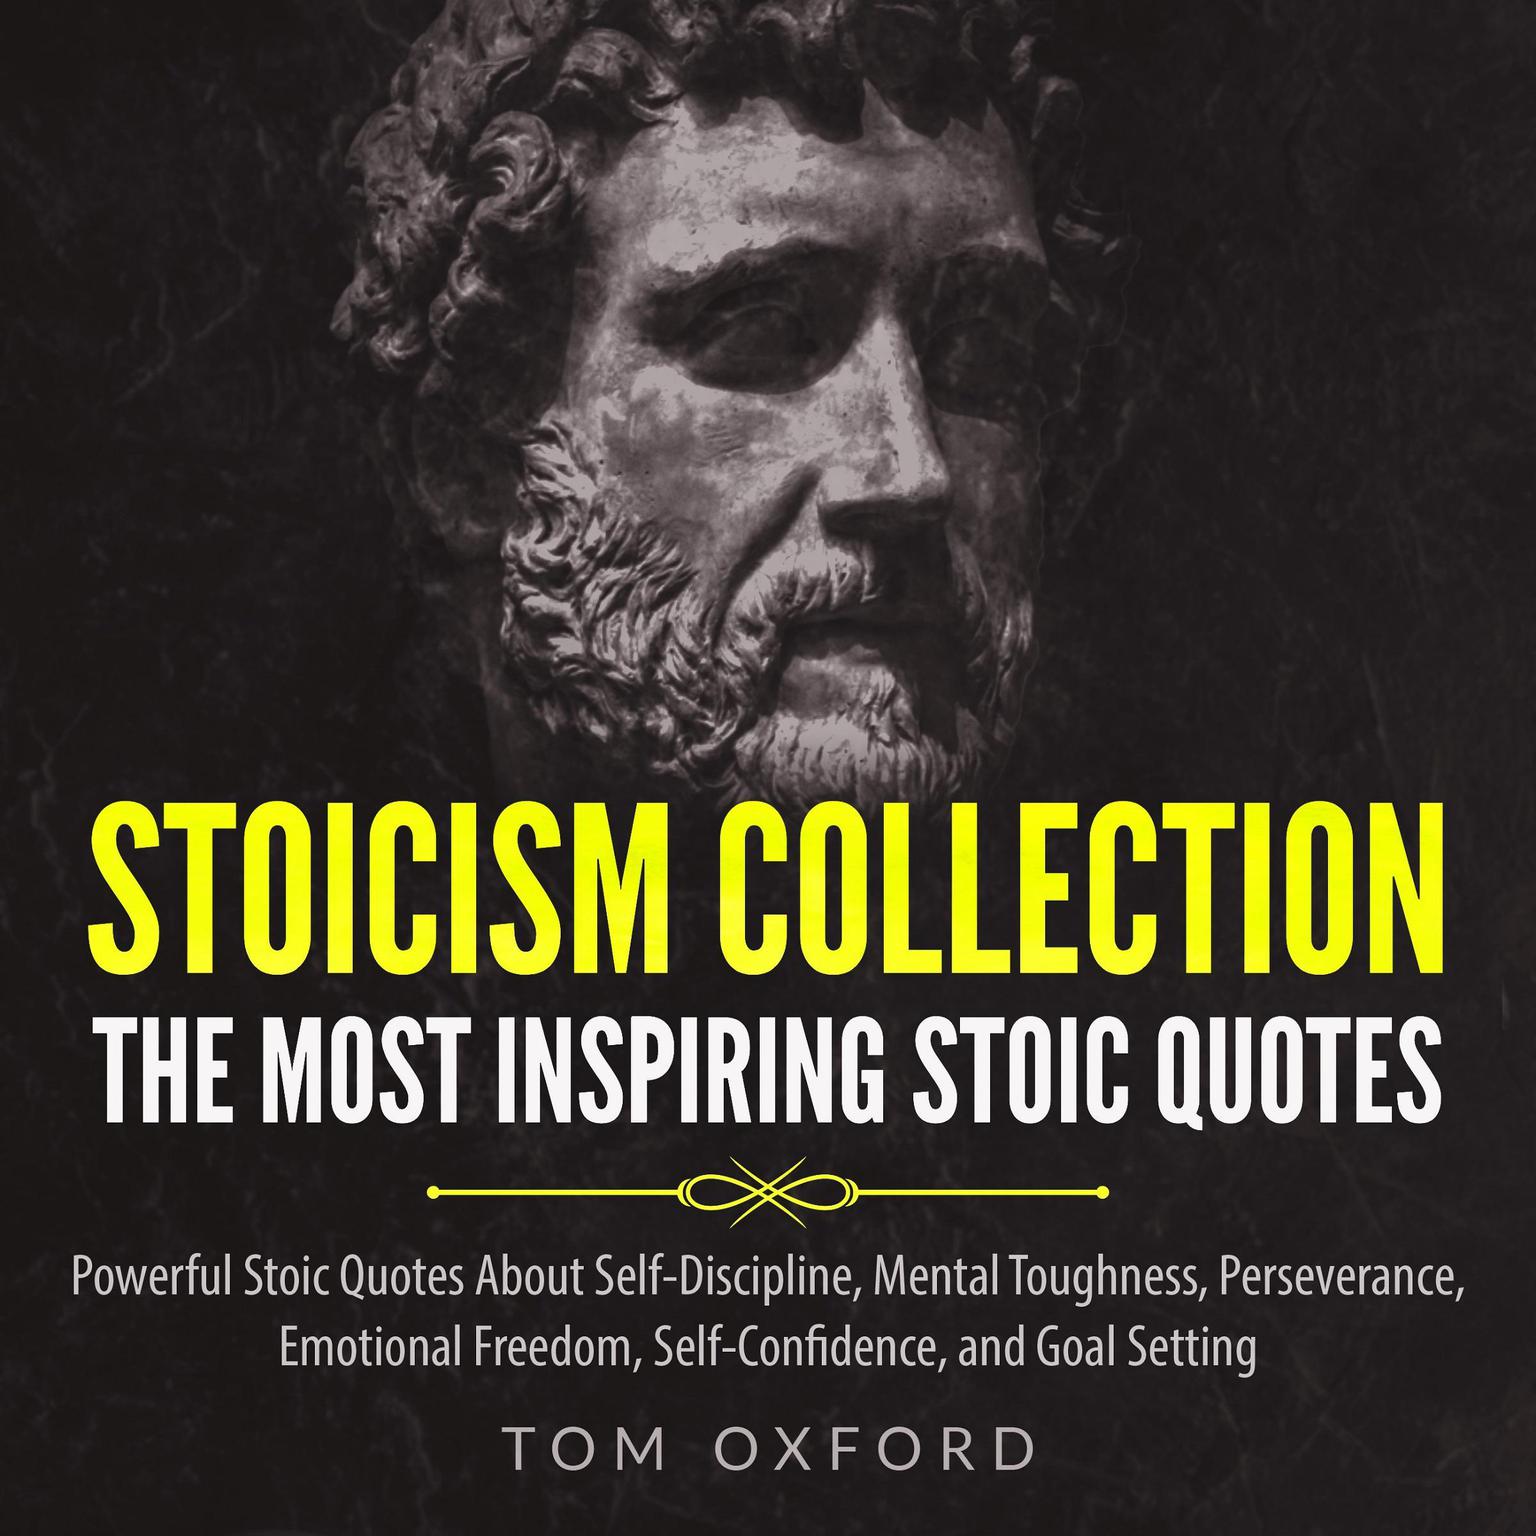 Stoicism Collection: The Most Inspiring Stoic Quotes: Powerful Stoic Quotes About Self-Discipline, Mental Toughness, Perseverance, Emotional Freedom, Self-Confidence, and Goal Setting Audiobook, by Tom Oxford